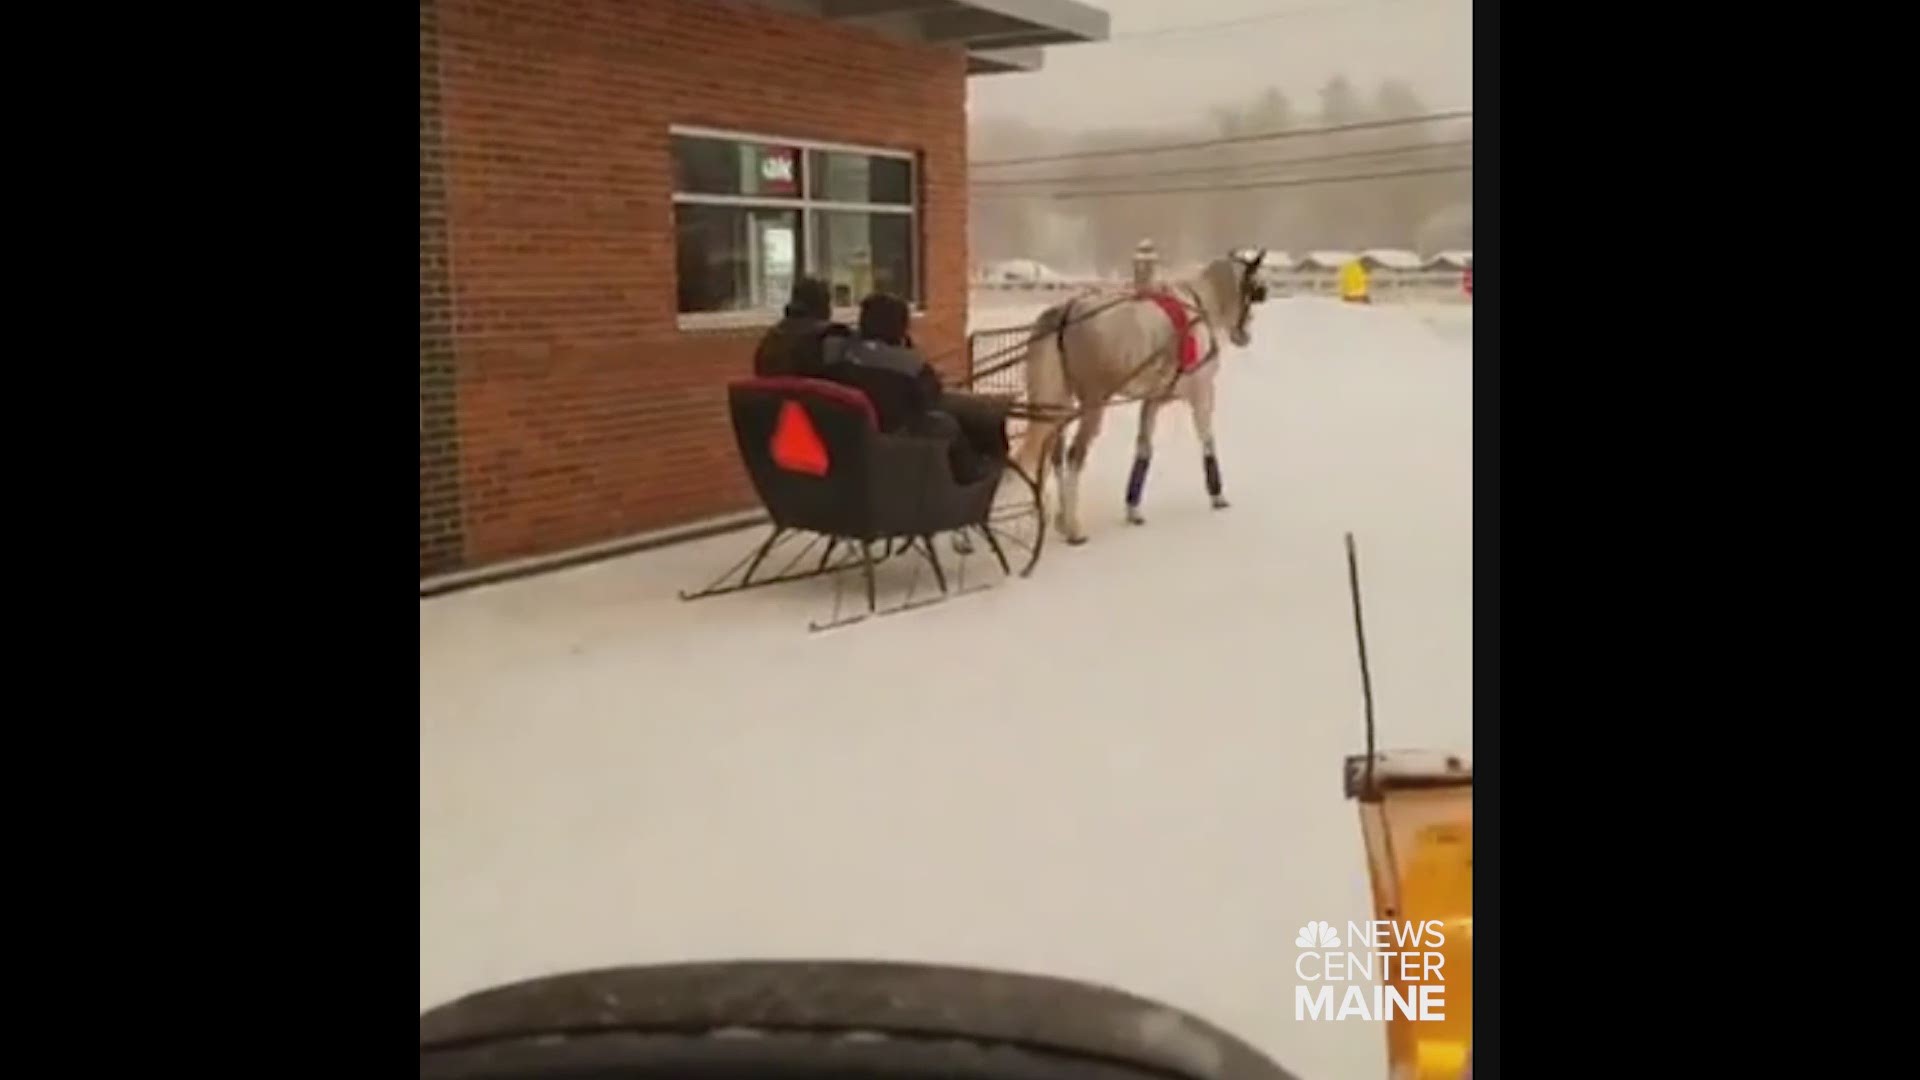 Mike and Charlene Cushing of Farmington were in need of some hot chocolate Sunday, Jan. 20, during the stormy weather so they hitched up their standardbred and galloped over to the local McDonald's.